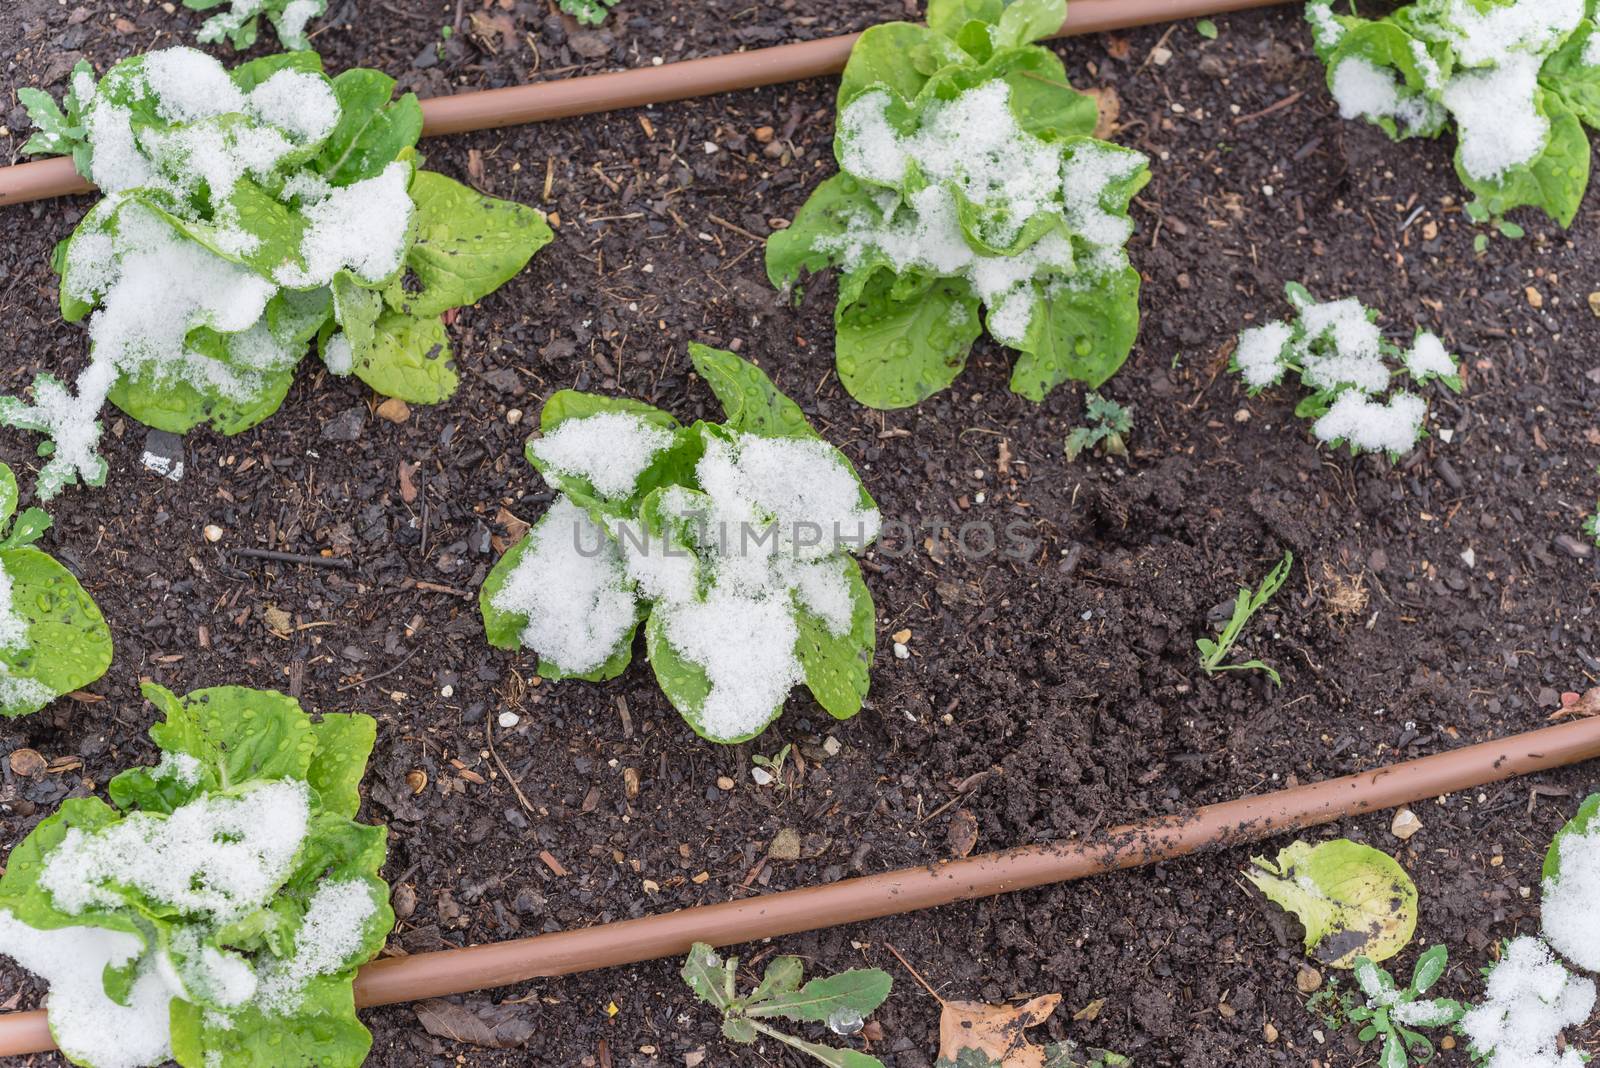 Row of lettuce plants with snow covered at community garden near Dallas, Texas, America. Organic salad green winter crop with irrigation system and mulch soil